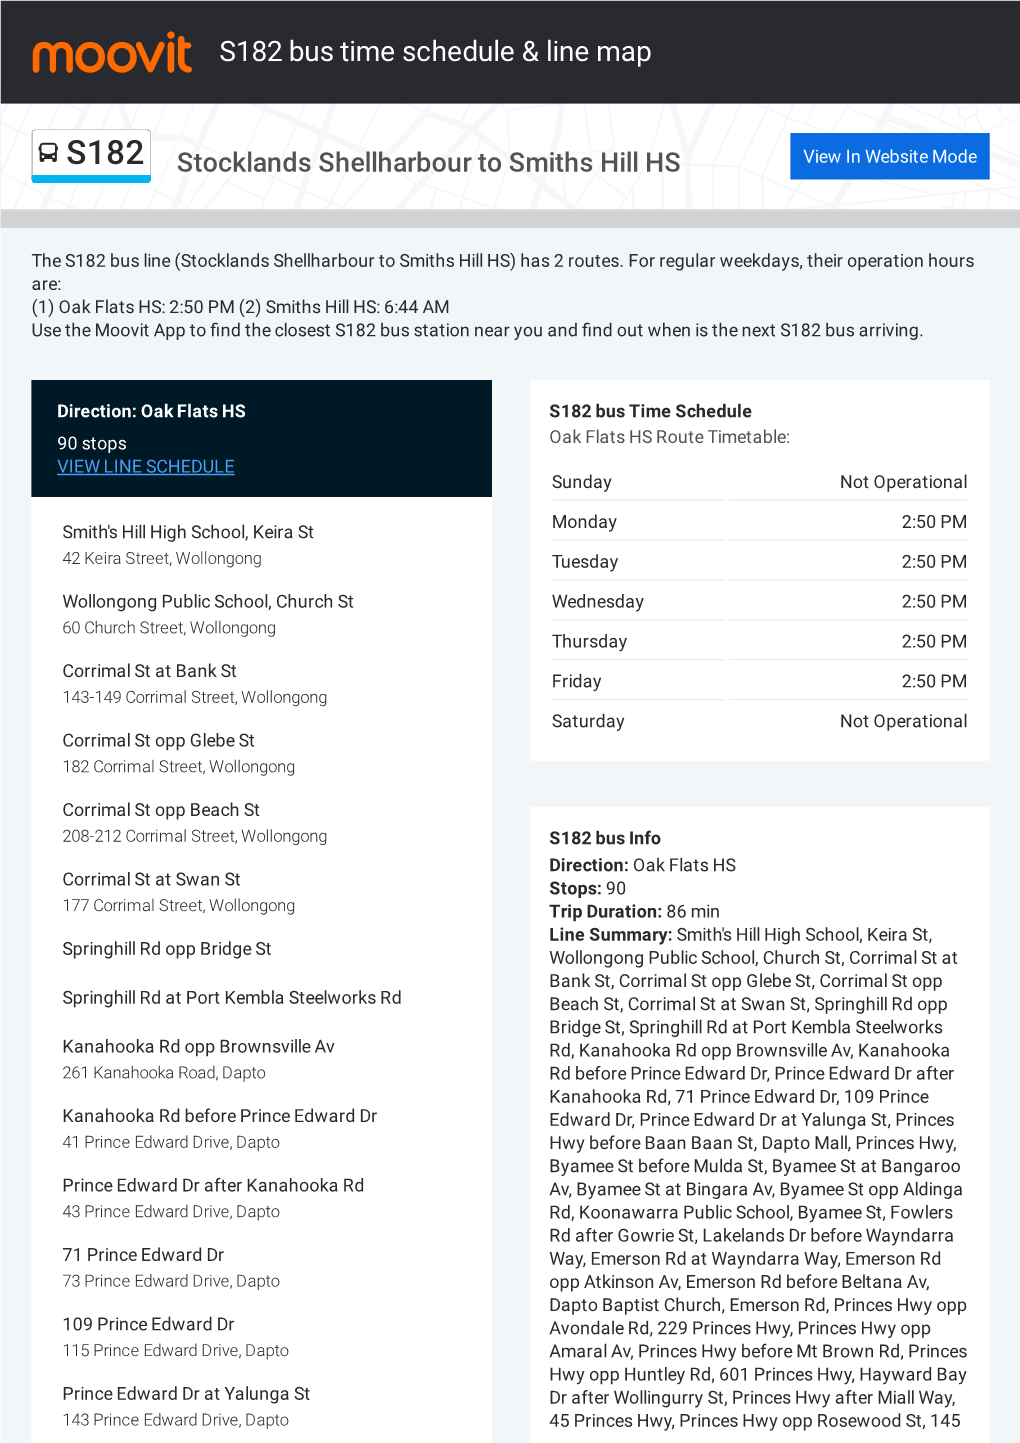 S182 Bus Time Schedule & Line Route